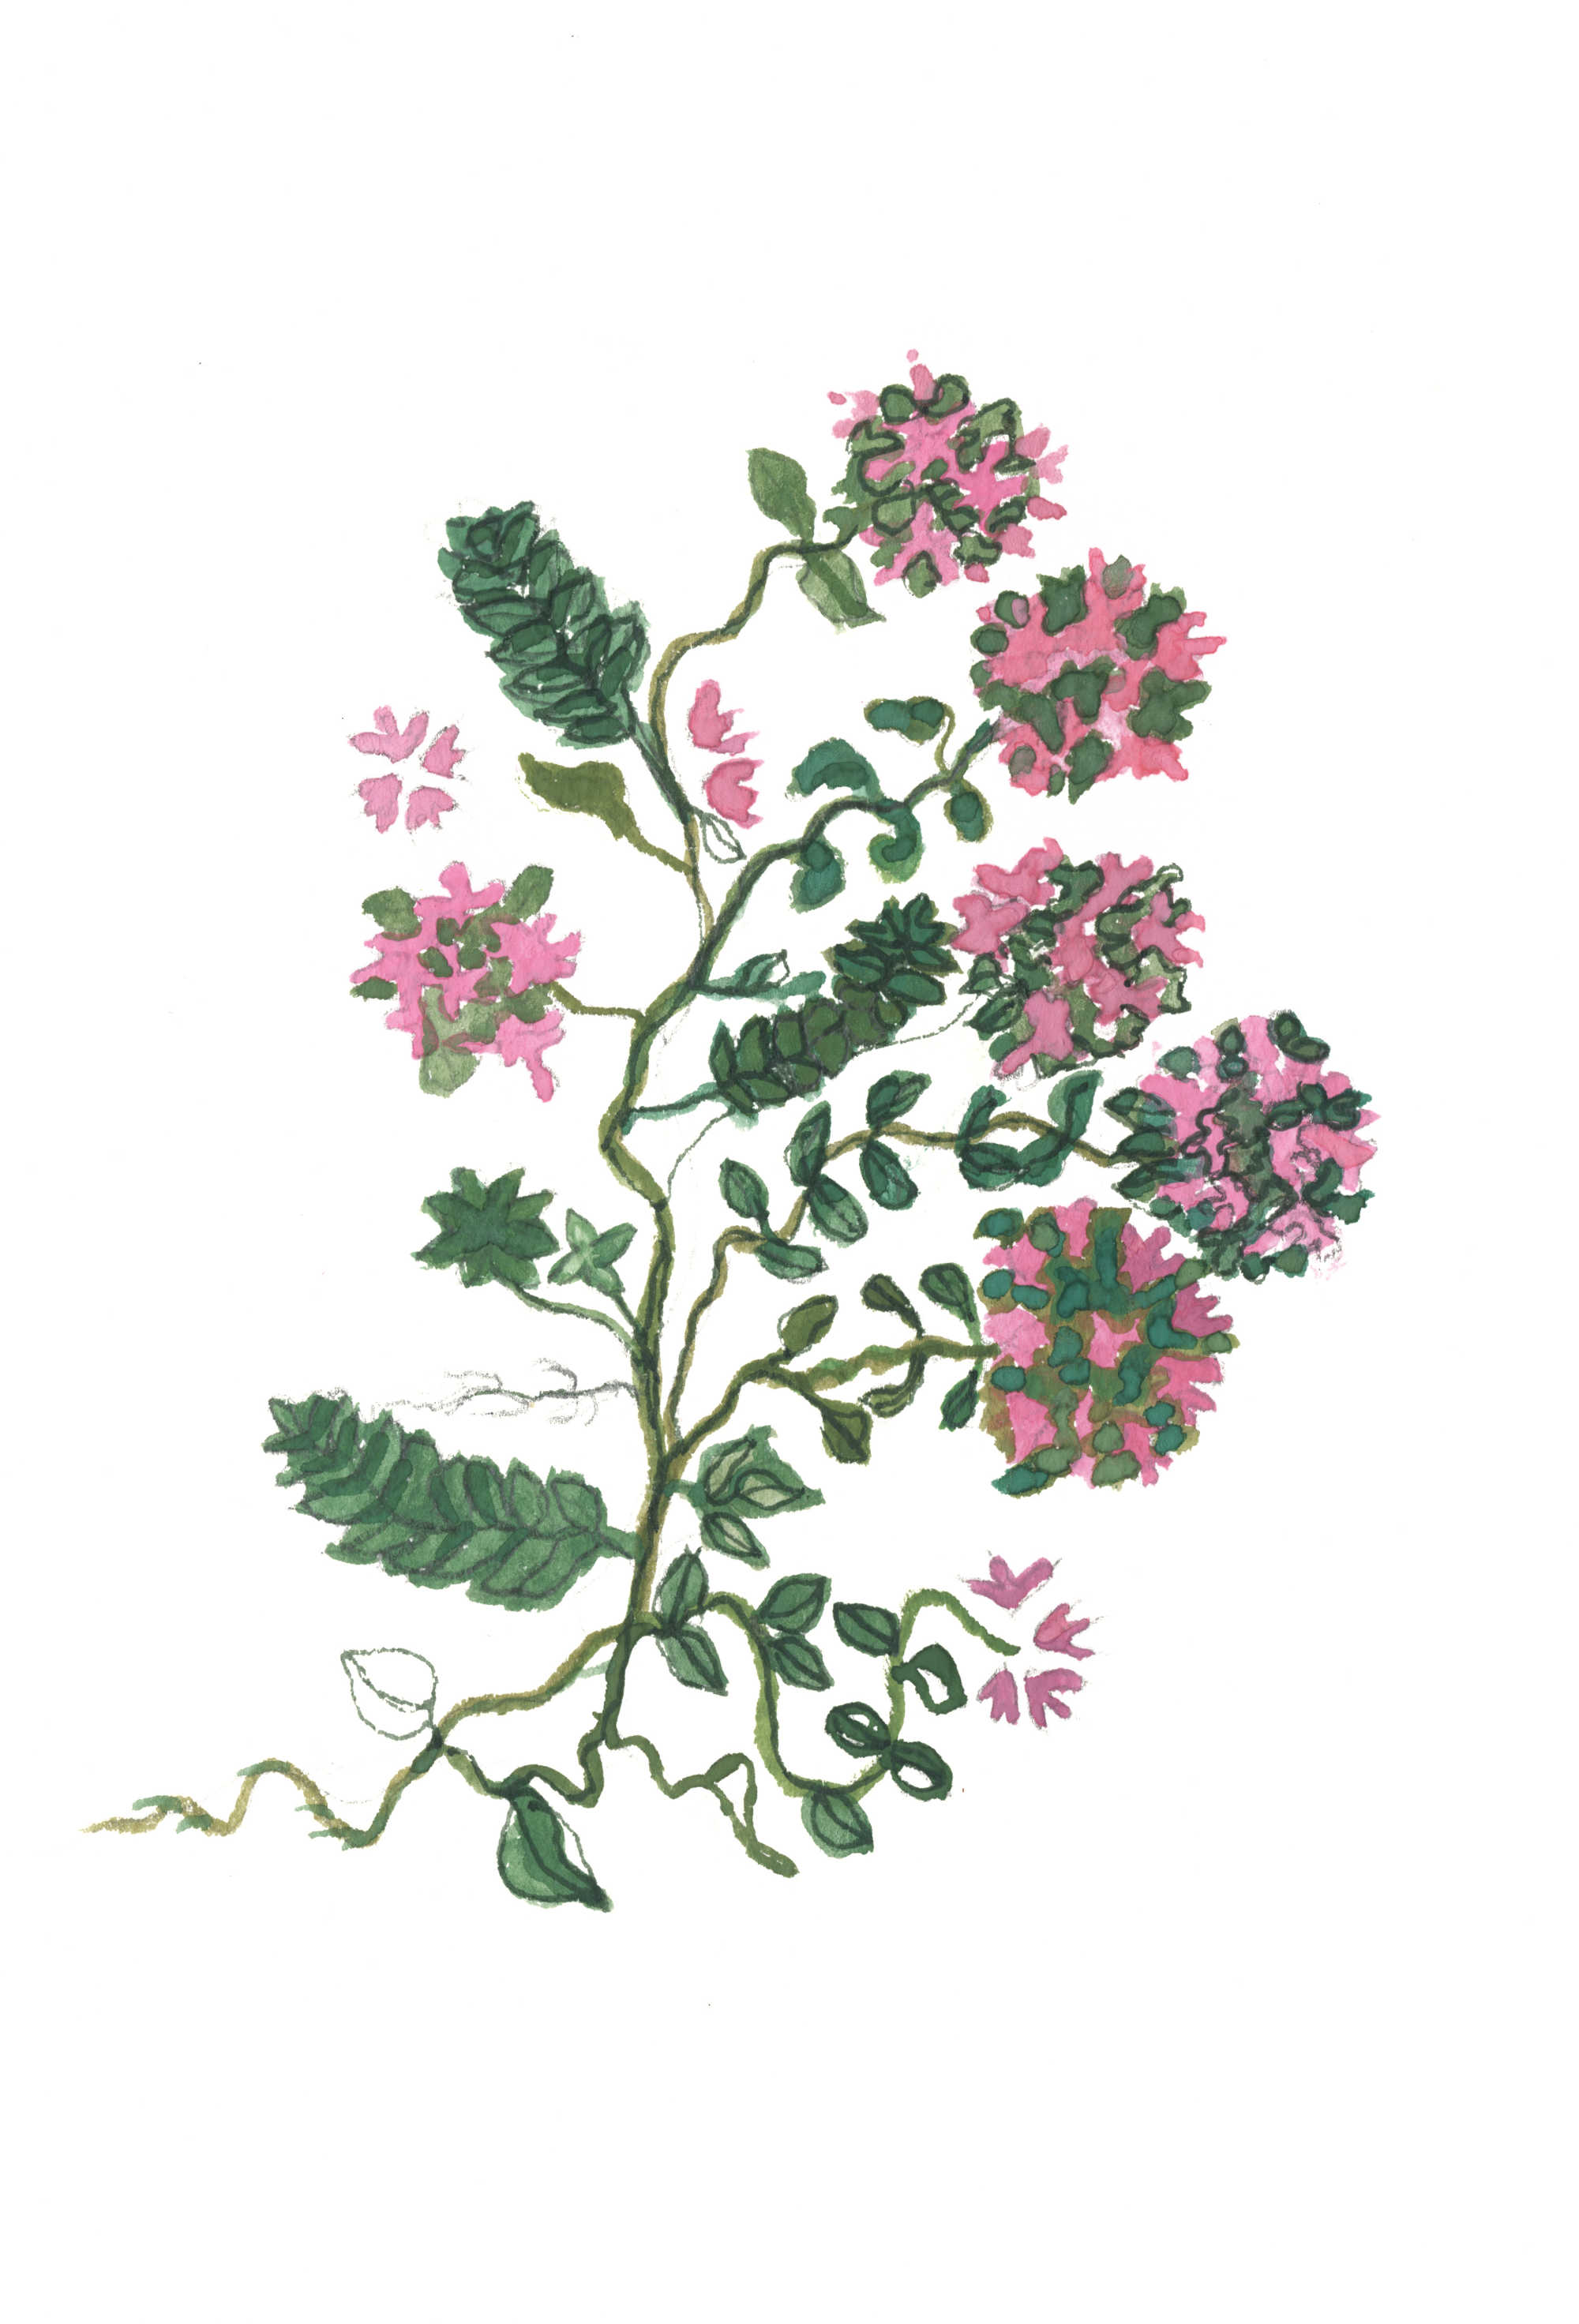 Arctic thyme. Illustration: Renate Feizaka. Slippurinn mixes this with vodka and pear cider to create one of its distinctive cocktails.